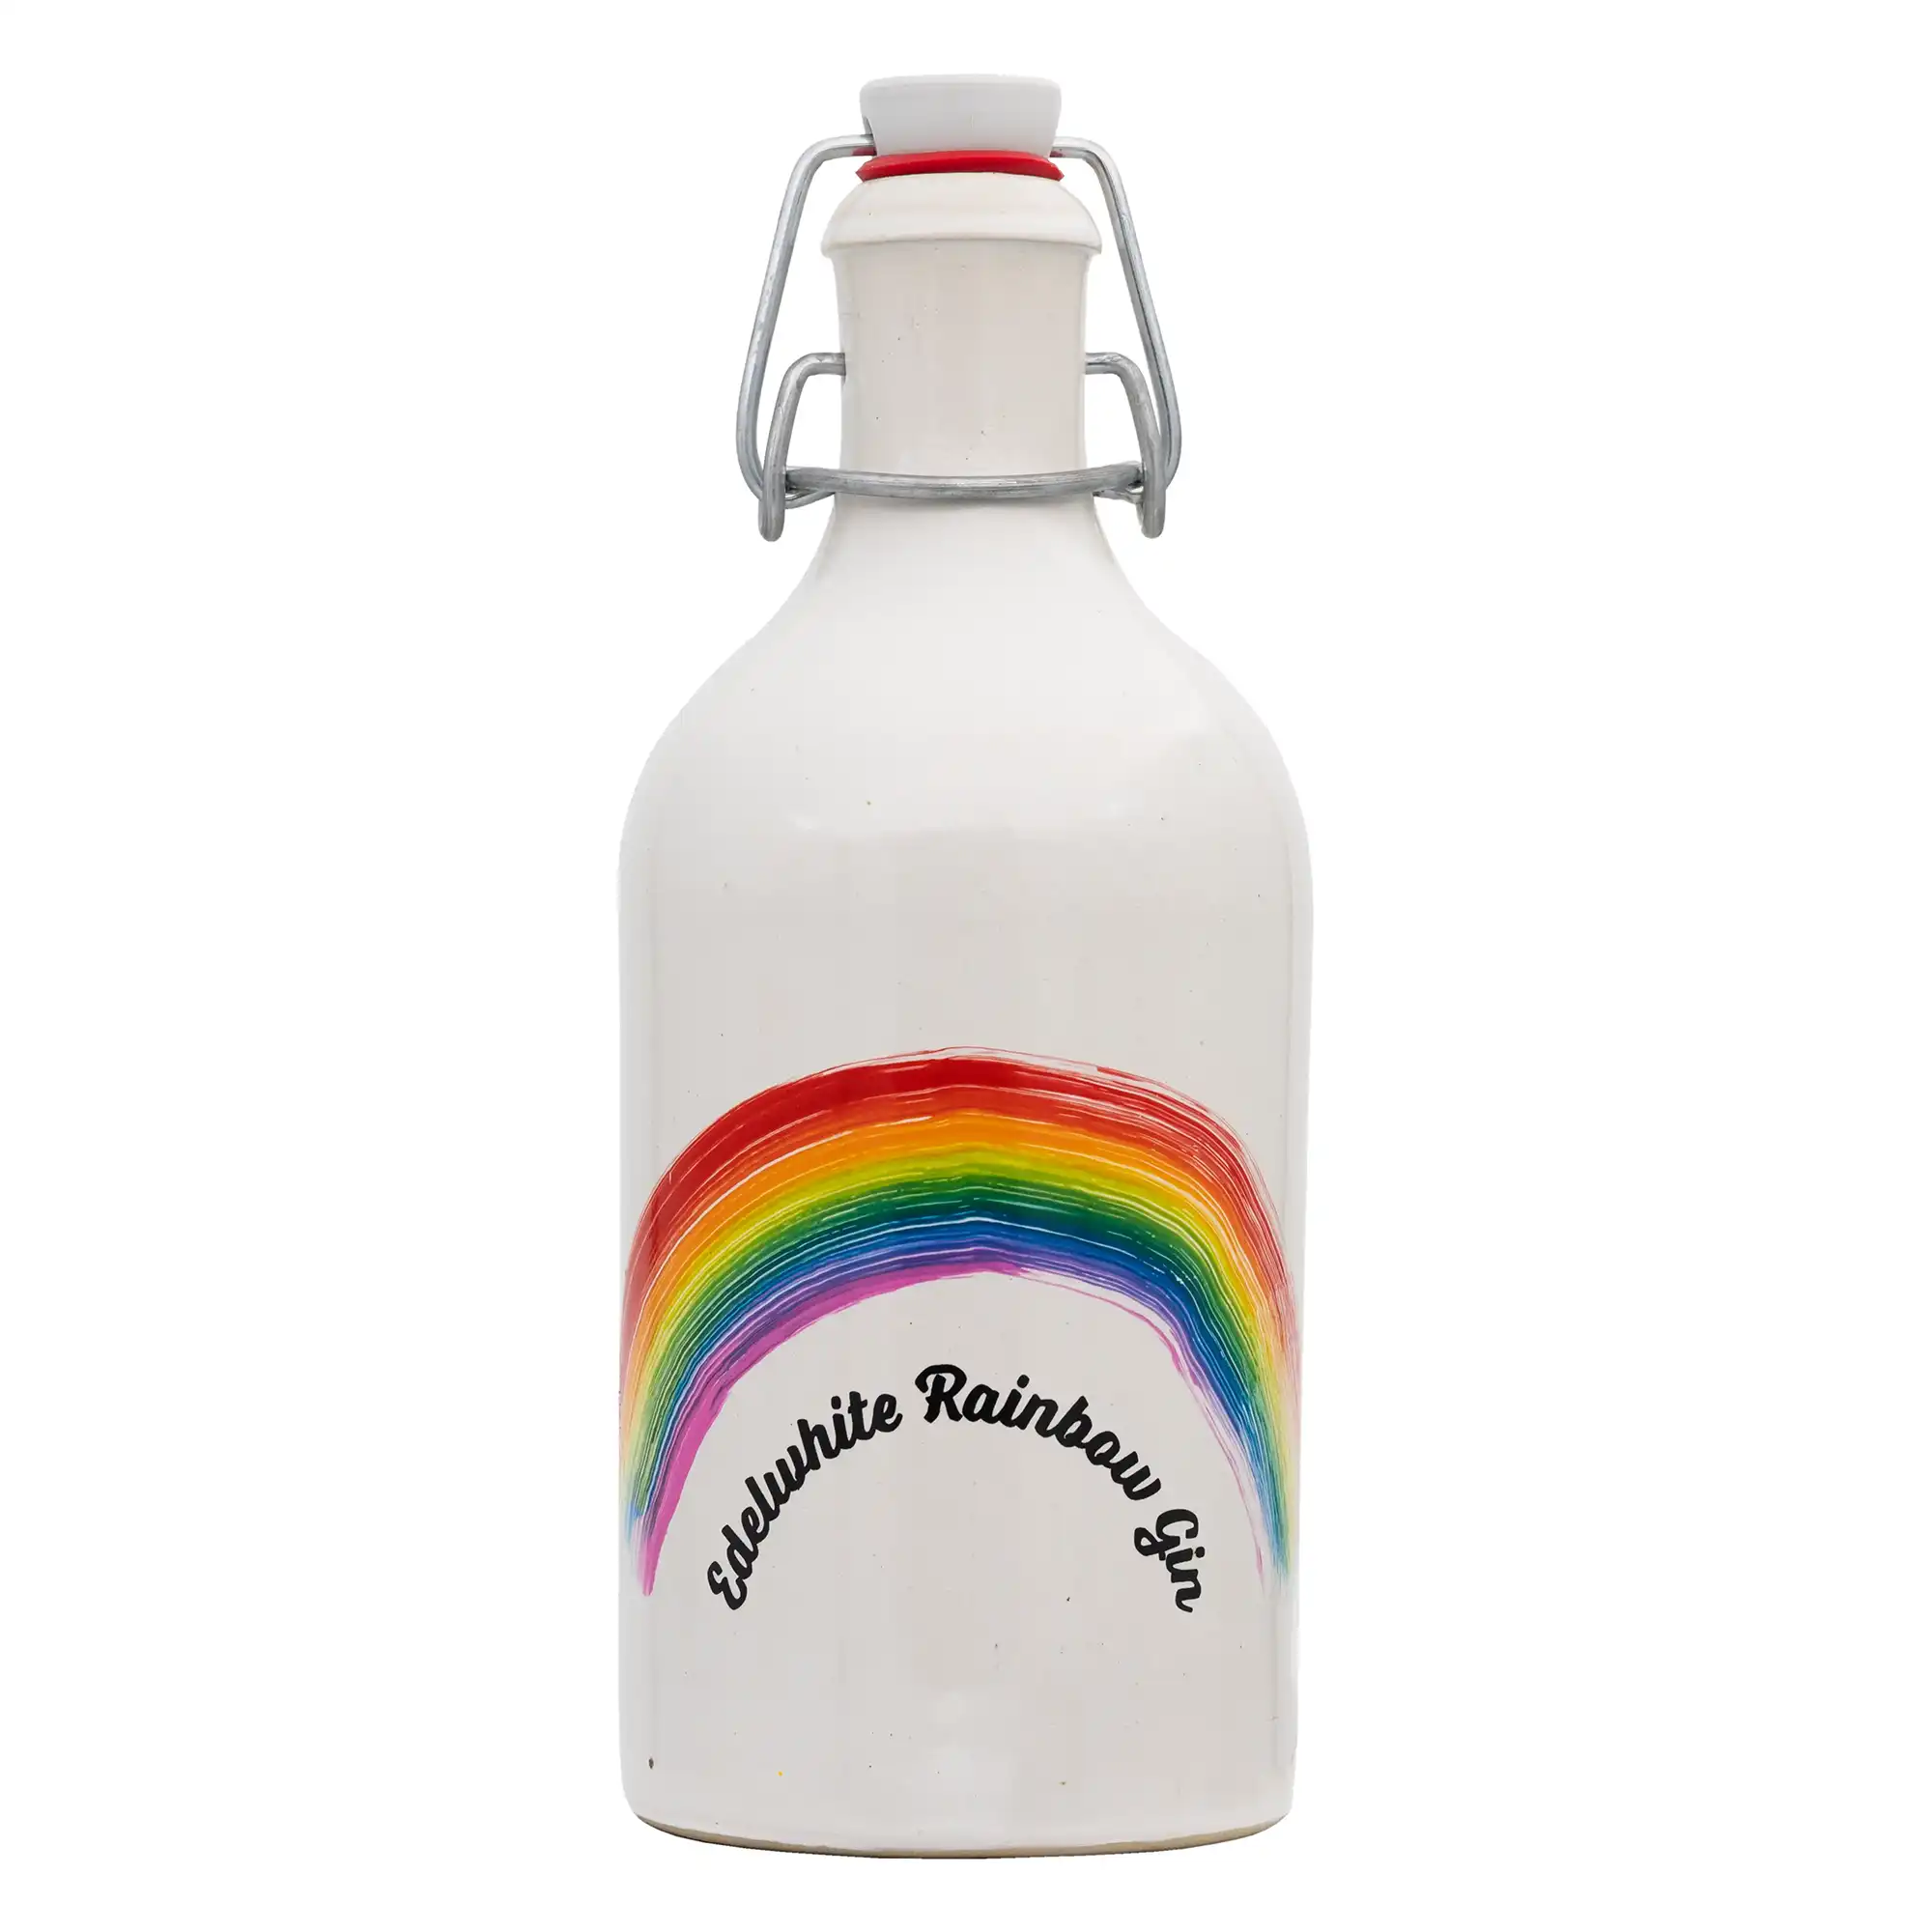 Featured image for “Edelwhite Rainbow Gin – Swiss Gin (40%vol)”